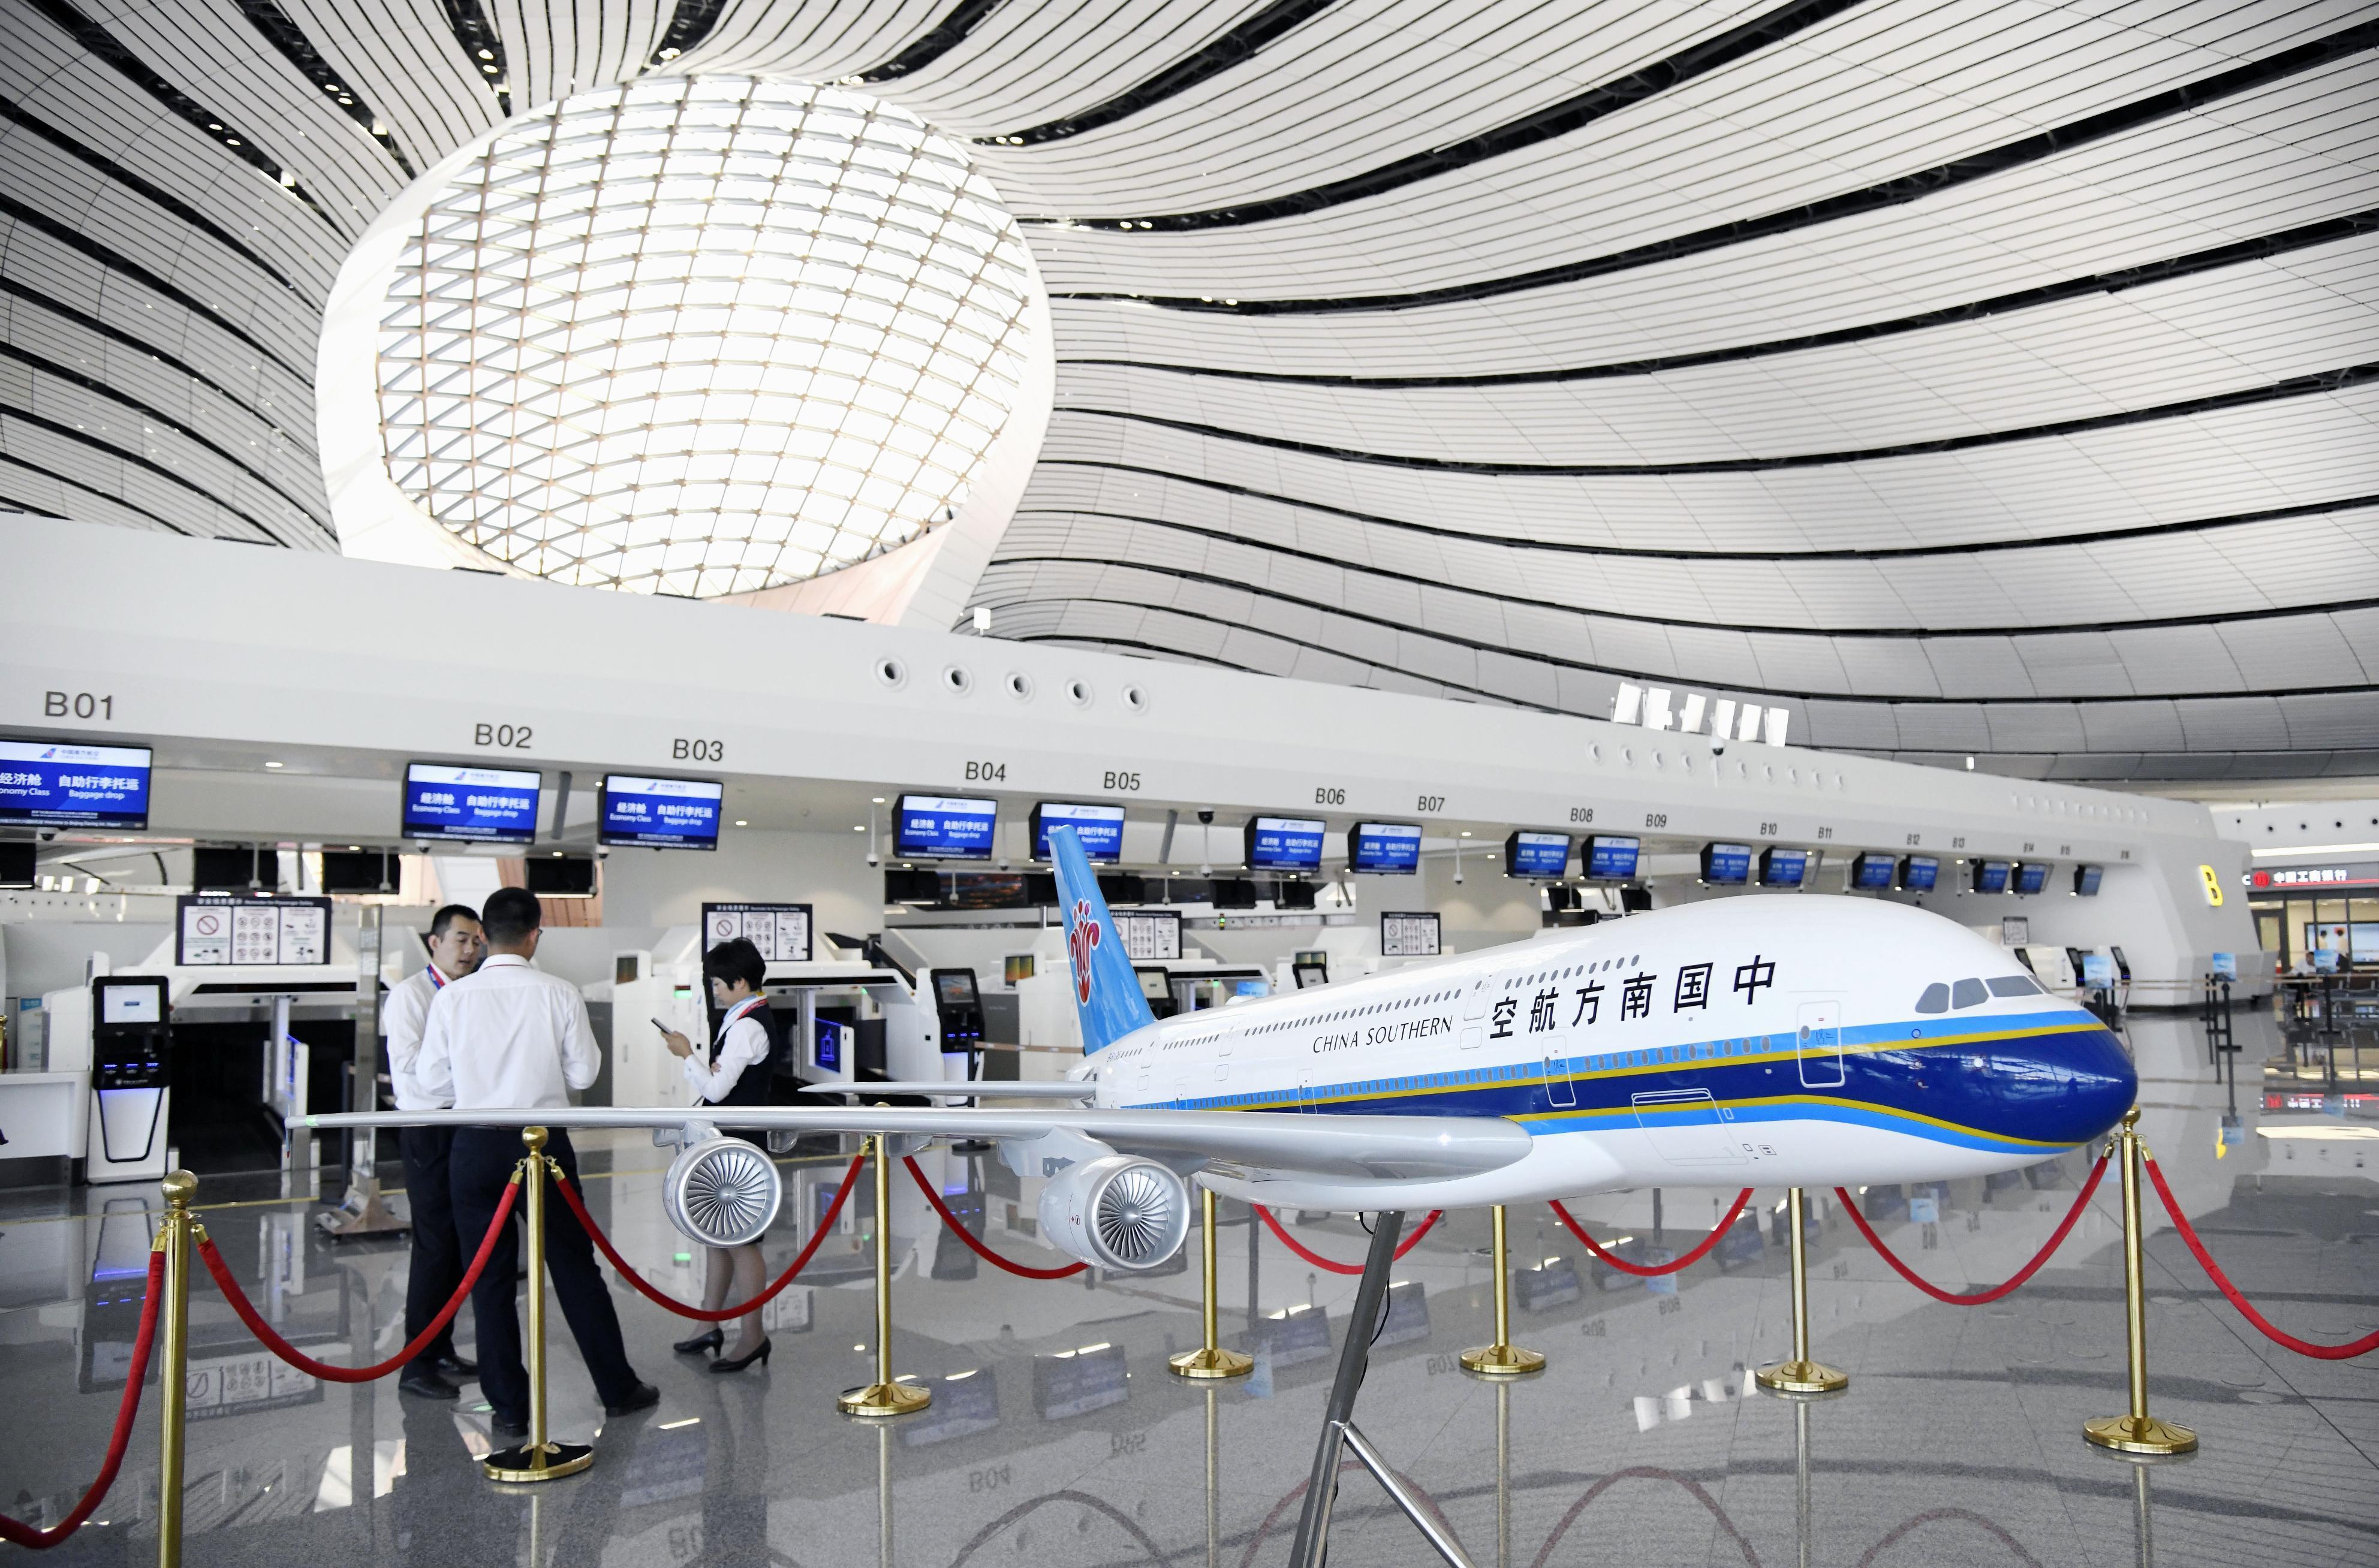 The departure lobby is seen at the new Daxing International Airport ahead of the 70th founding anniversary of the People's Republic of China in Beijing, China  Wednesday, Sept. 25, 2019.(Naohiko Hatta/Kyodo News via AP)